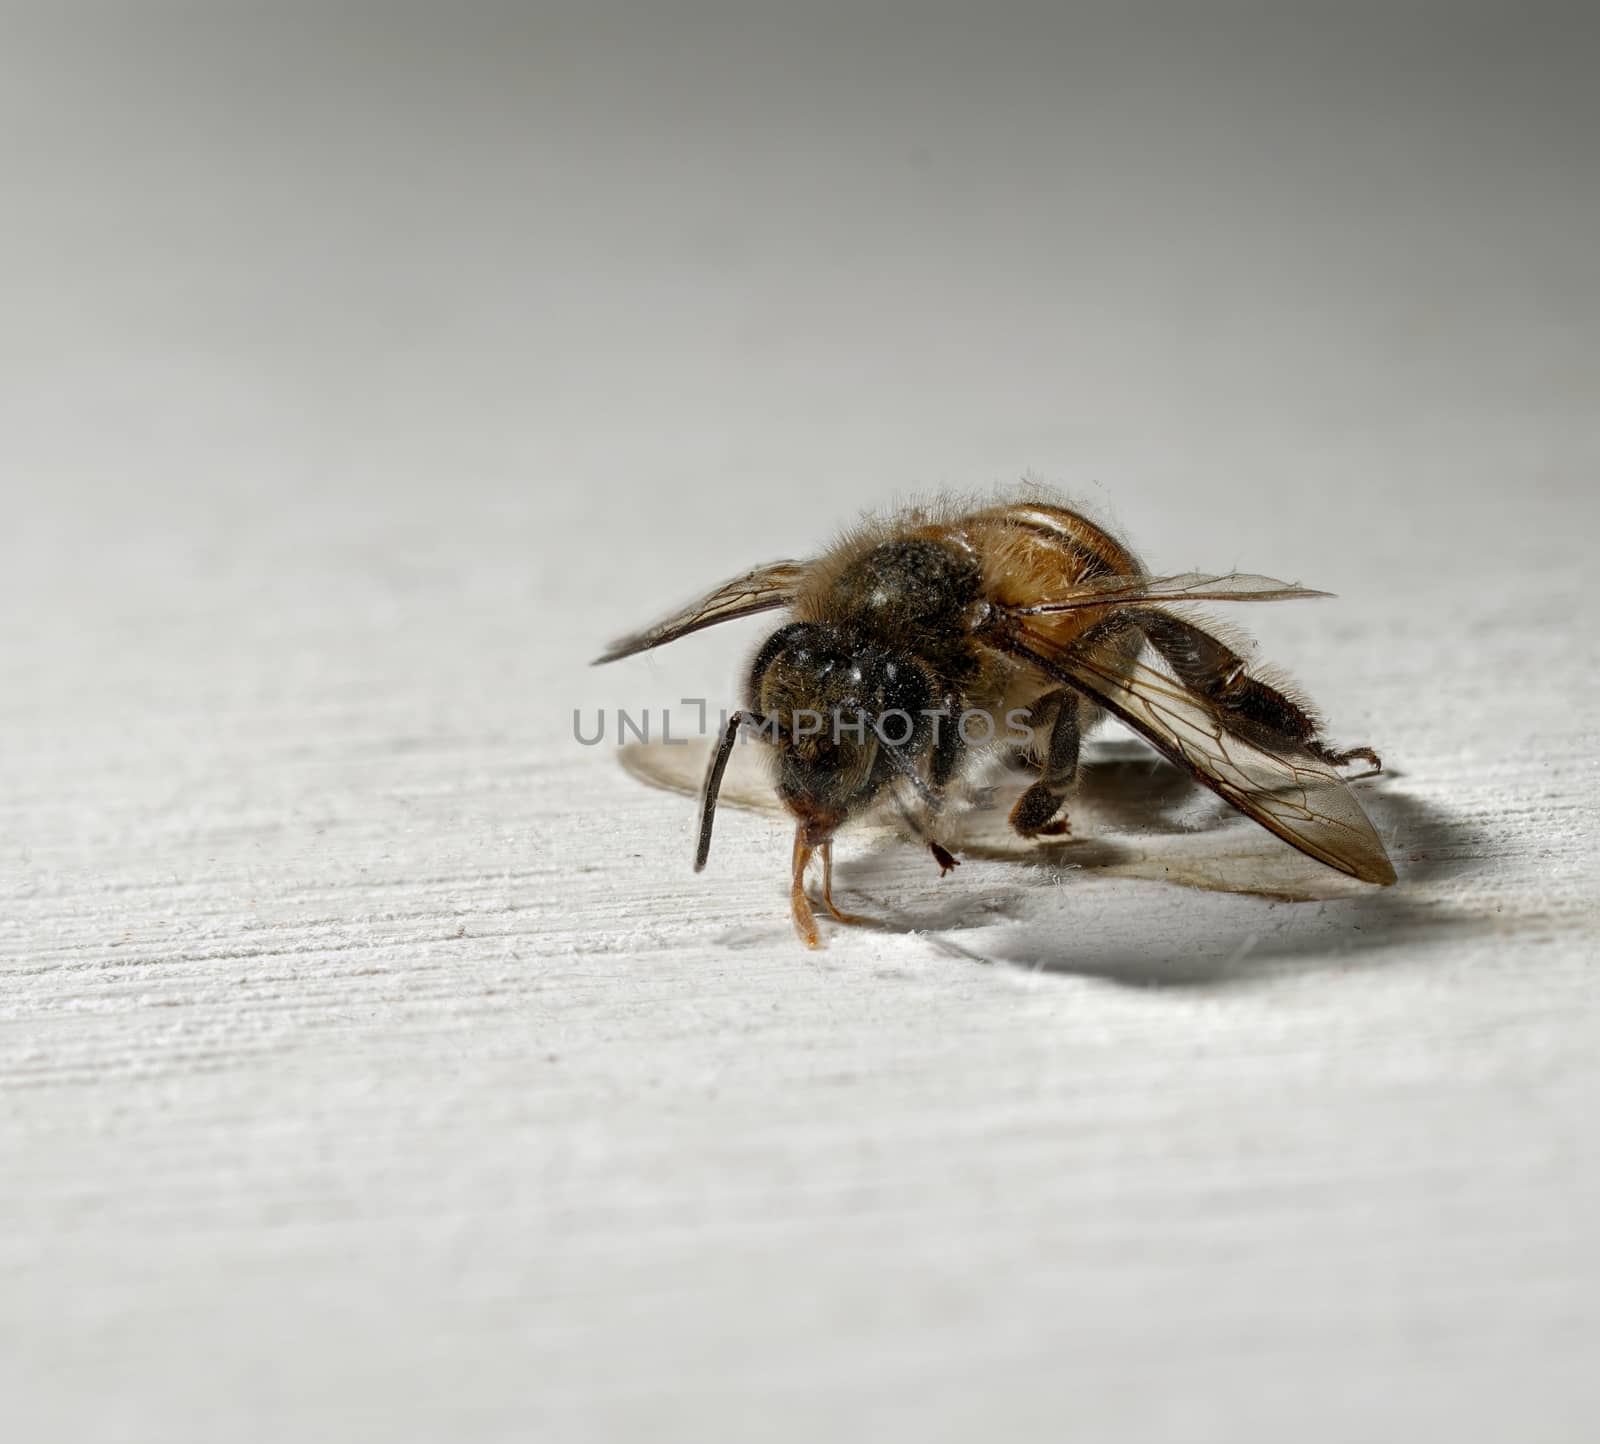 A close up of one worker bee on a white wooden background. by noppha80